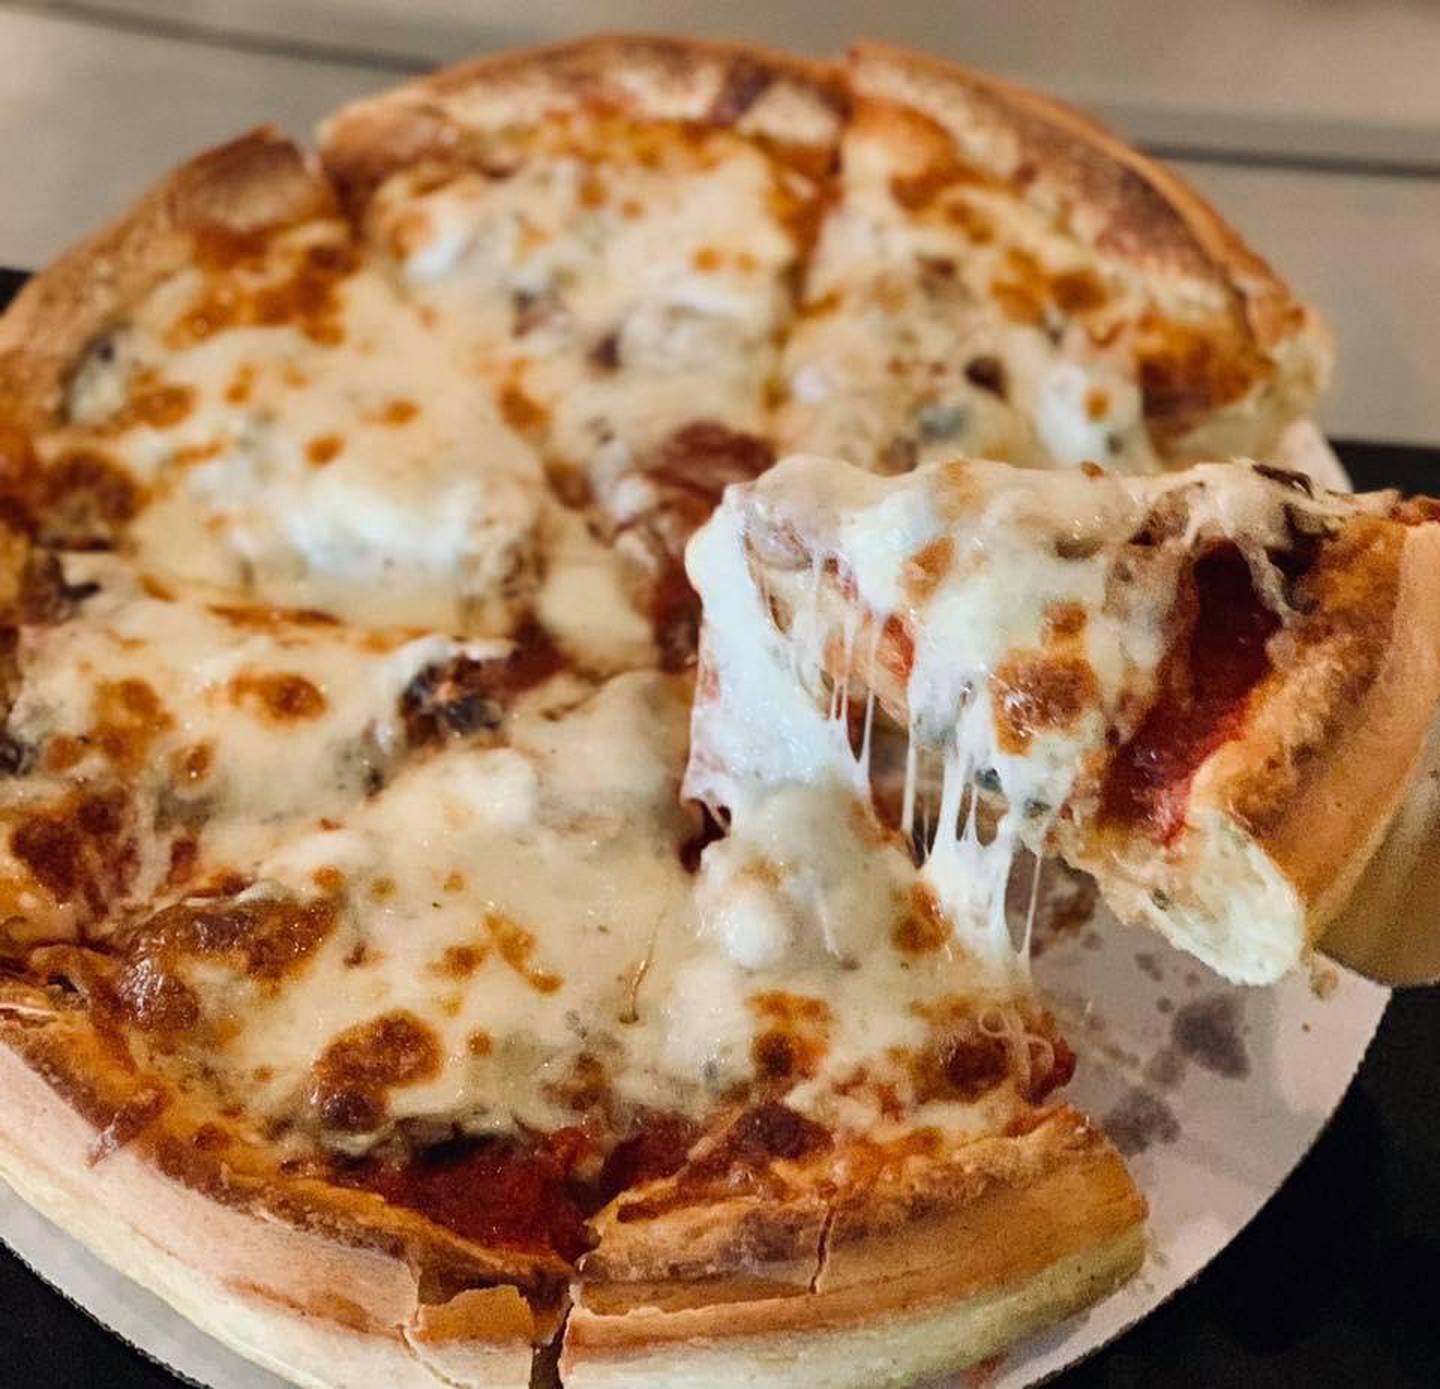 Roberto's Ristorante & Pizzeria in Elmhurst was voted in the top 10 pizza places in DuPage County by readers in 2021. (Photo from Roberto's Ristorante & Pizzeria Facebook page)